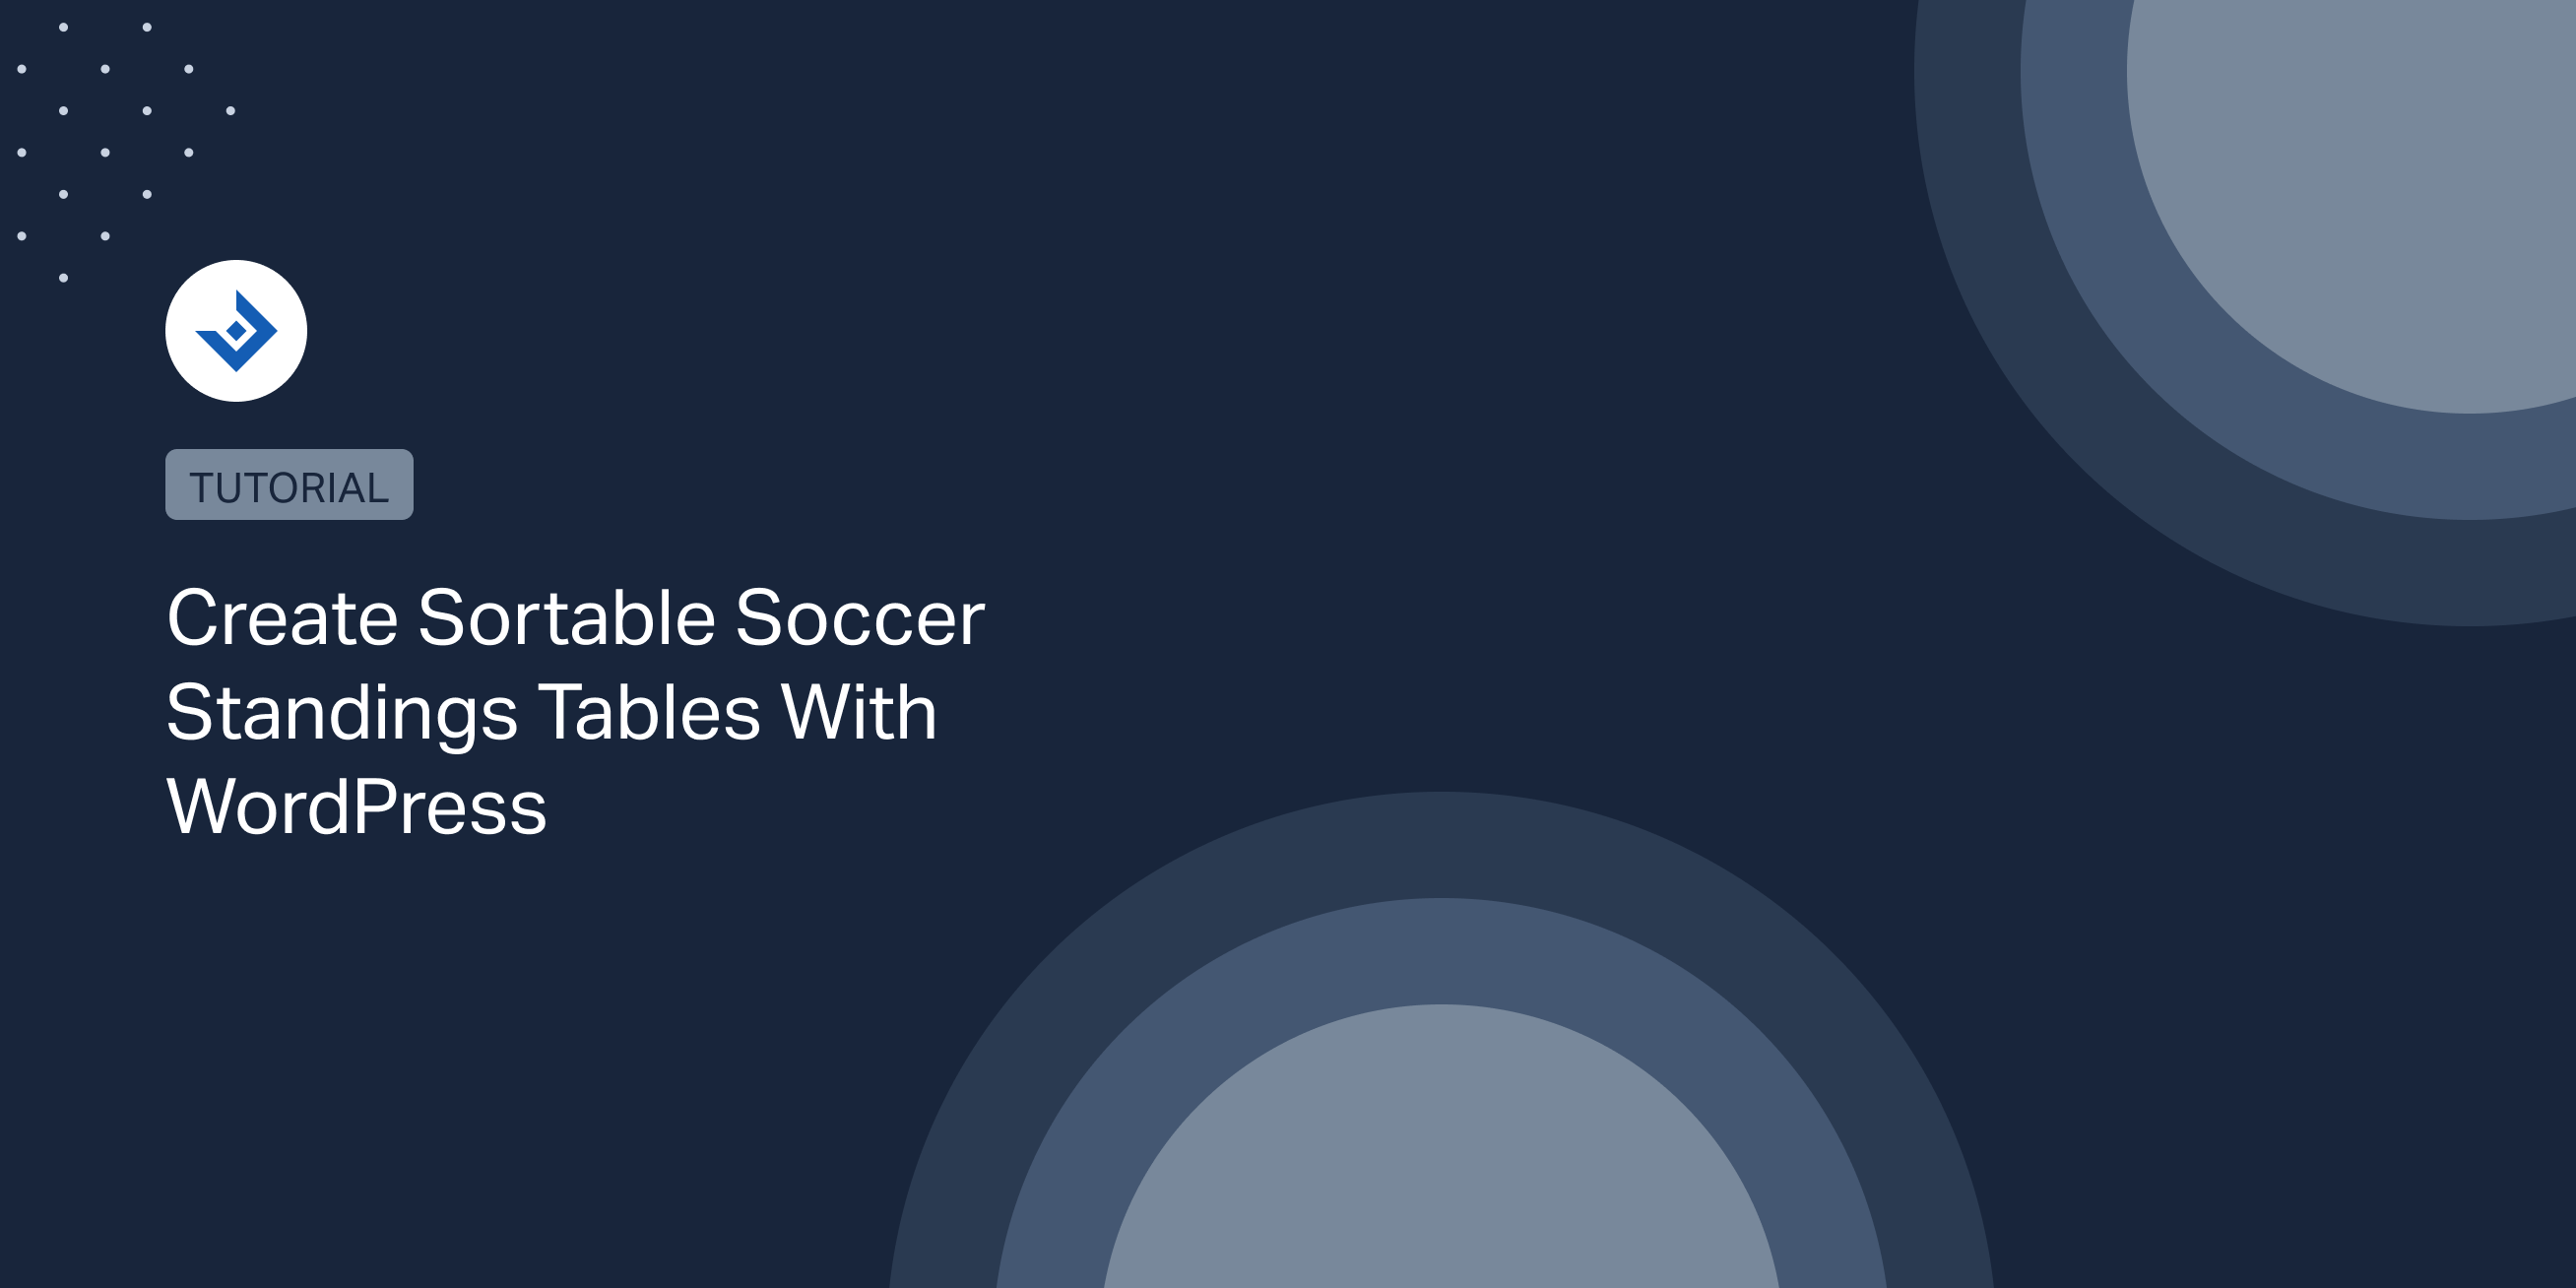 Create Sortable Soccer Standings Tables With WordPress